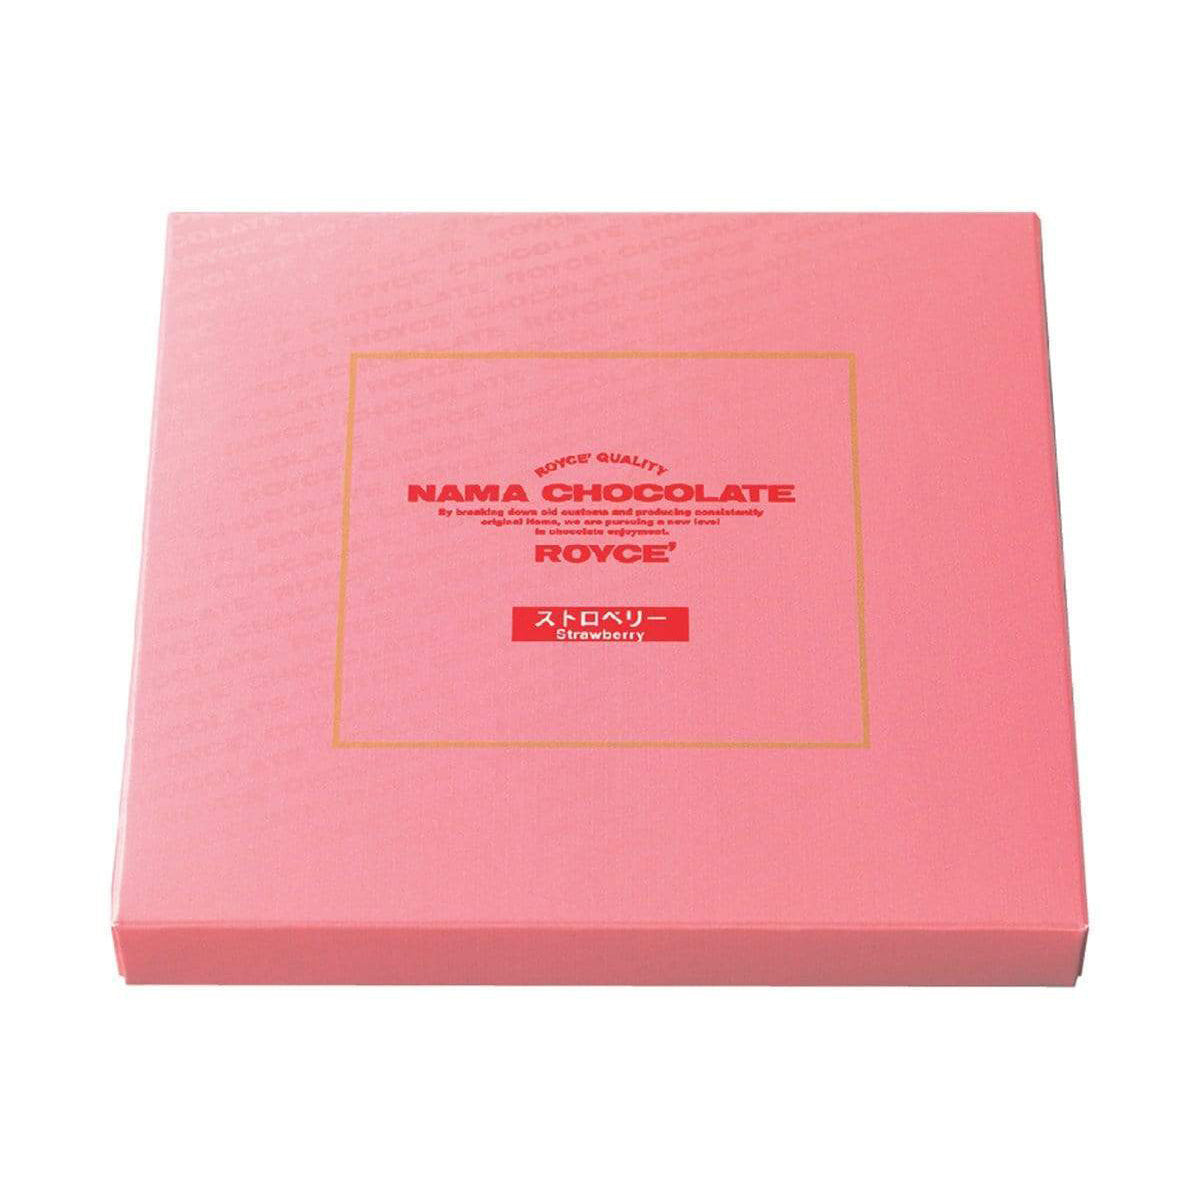 ROYCE' Chocolate - Nama Chocolate "Strawberry" - Image shows a pink box. Red text inside golden square says ROYCE' Quality Nama Chocolate By breaking down old customs and producing consistently original items, we are pursuing a new level in chocolate enjoyment. ROYCE' Strawberry.